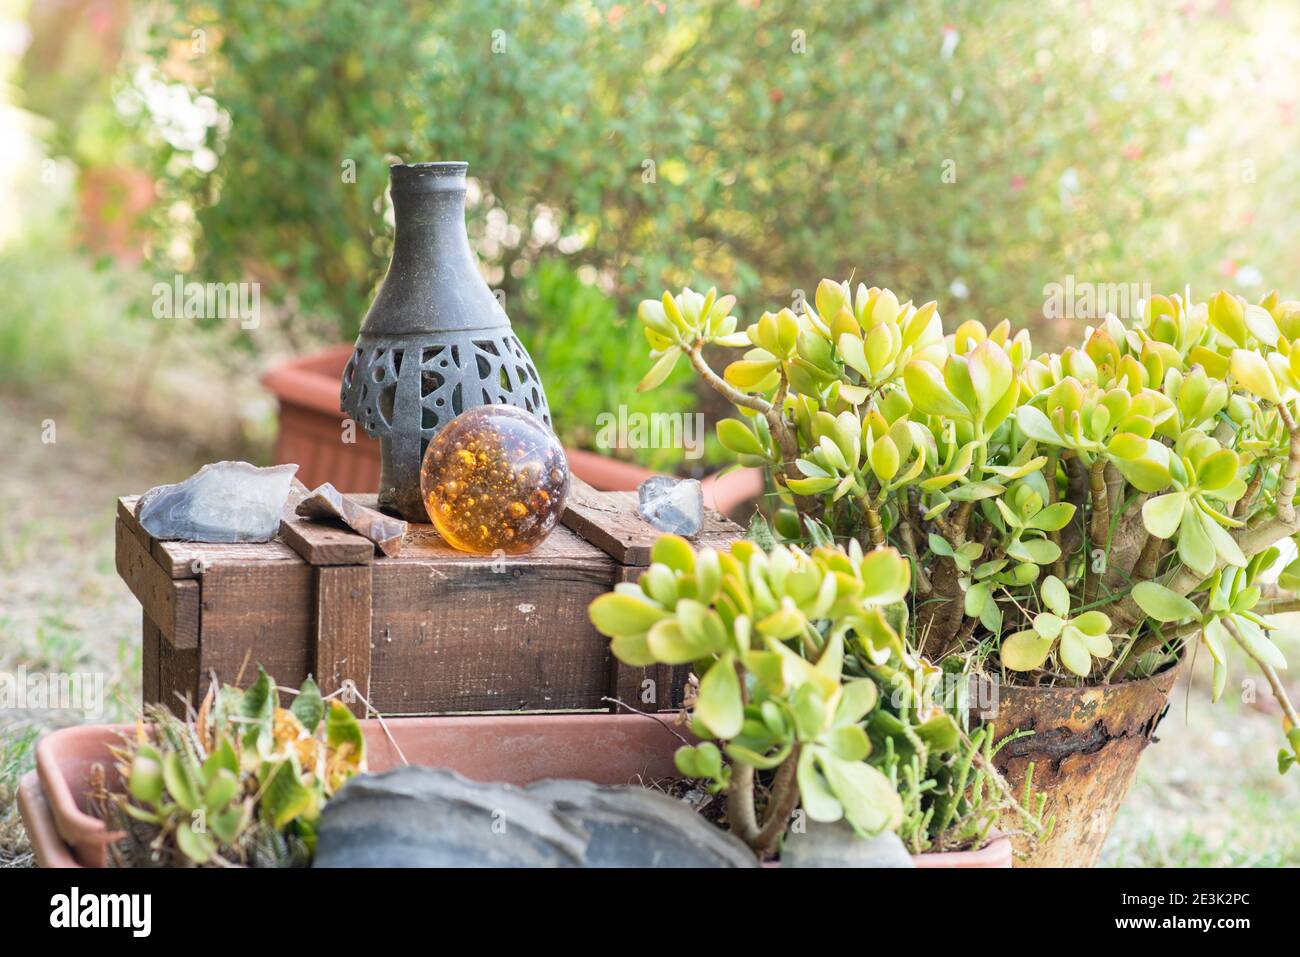 Recycled garden design and low-waste lifestyle. Rustic wooden box with vase and magic glass ball in a garden. Stock Photo